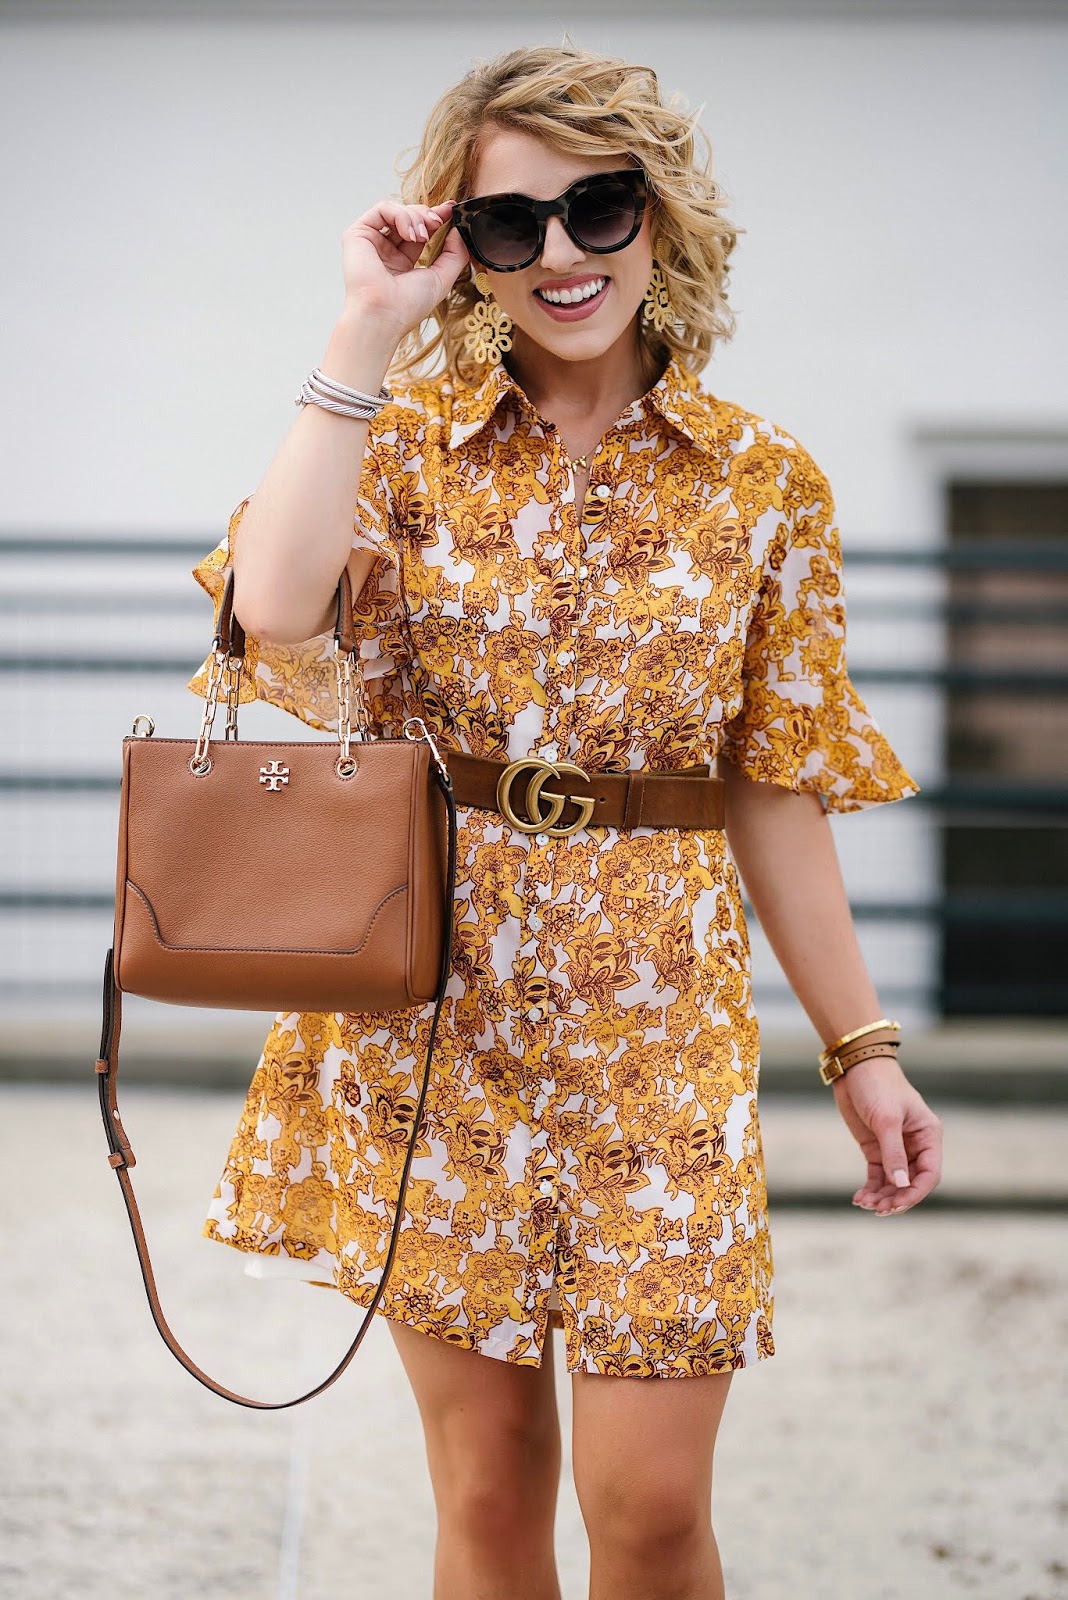 The Perfect Dress To Transition Into Fall: $60 Ruffle Sleeve Shirt Dress - Something Delightful Blog